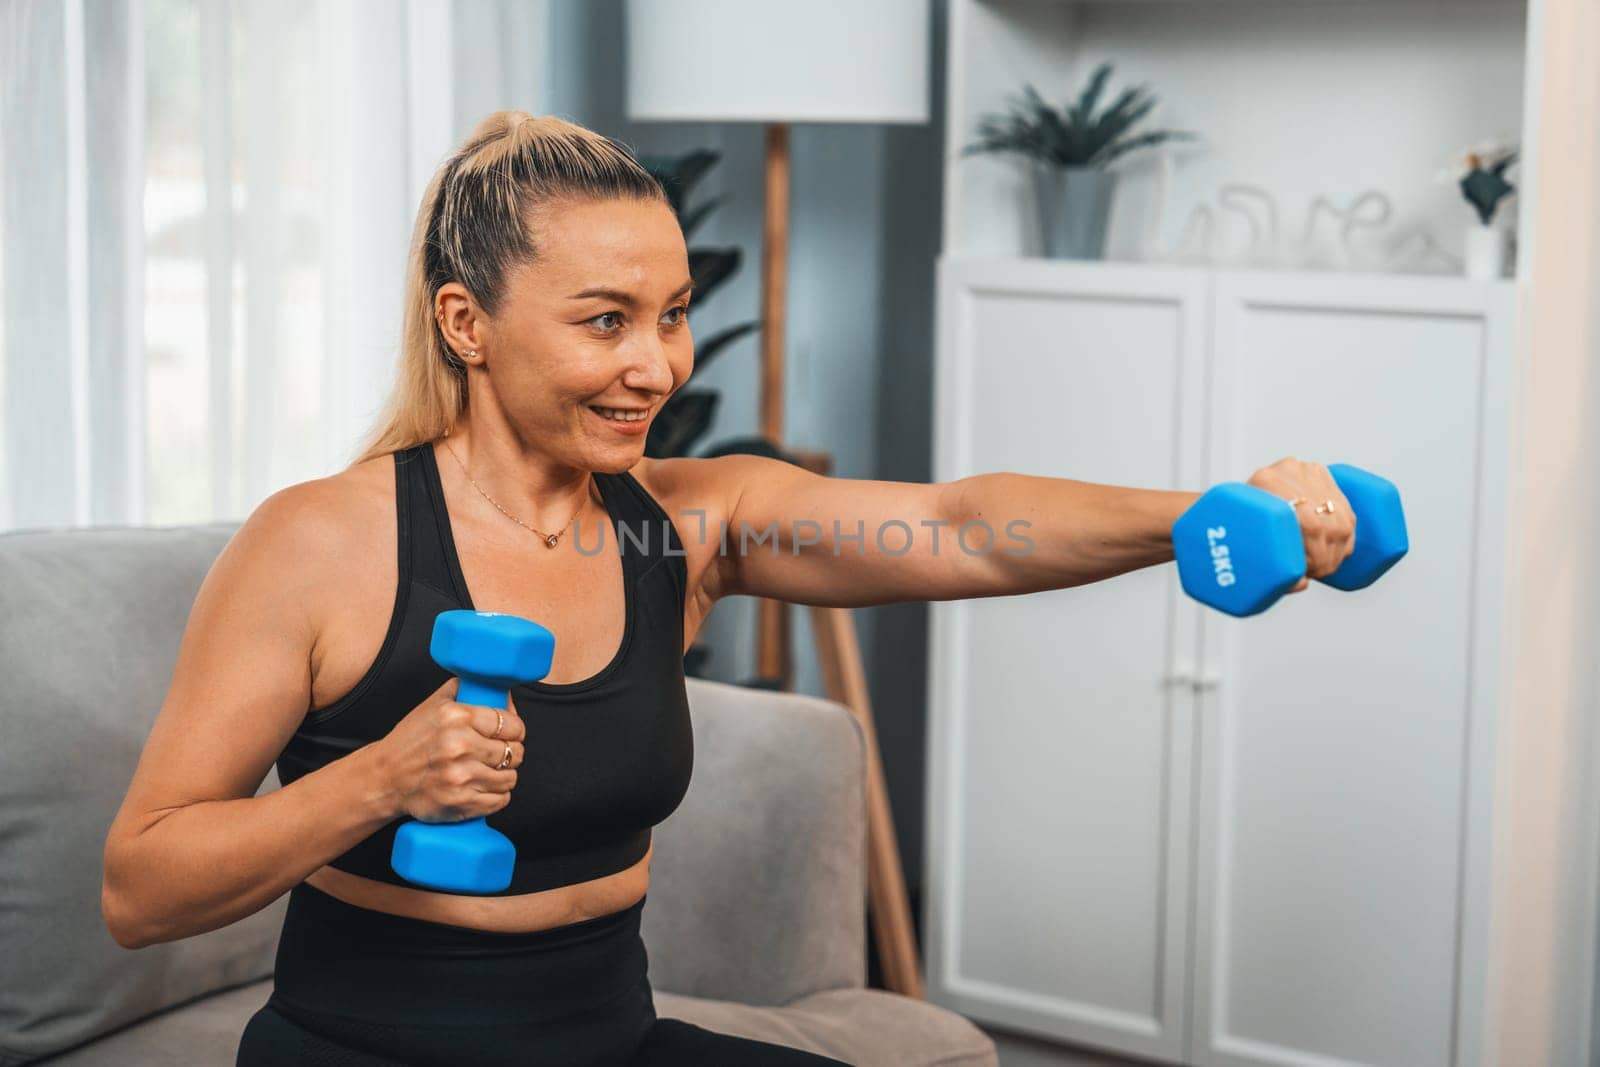 Athletic and sporty senior woman engaging in body workout routine with lifting dumbbell at home as concept of healthy fit body with body weight lifestyle after retirement. Clout